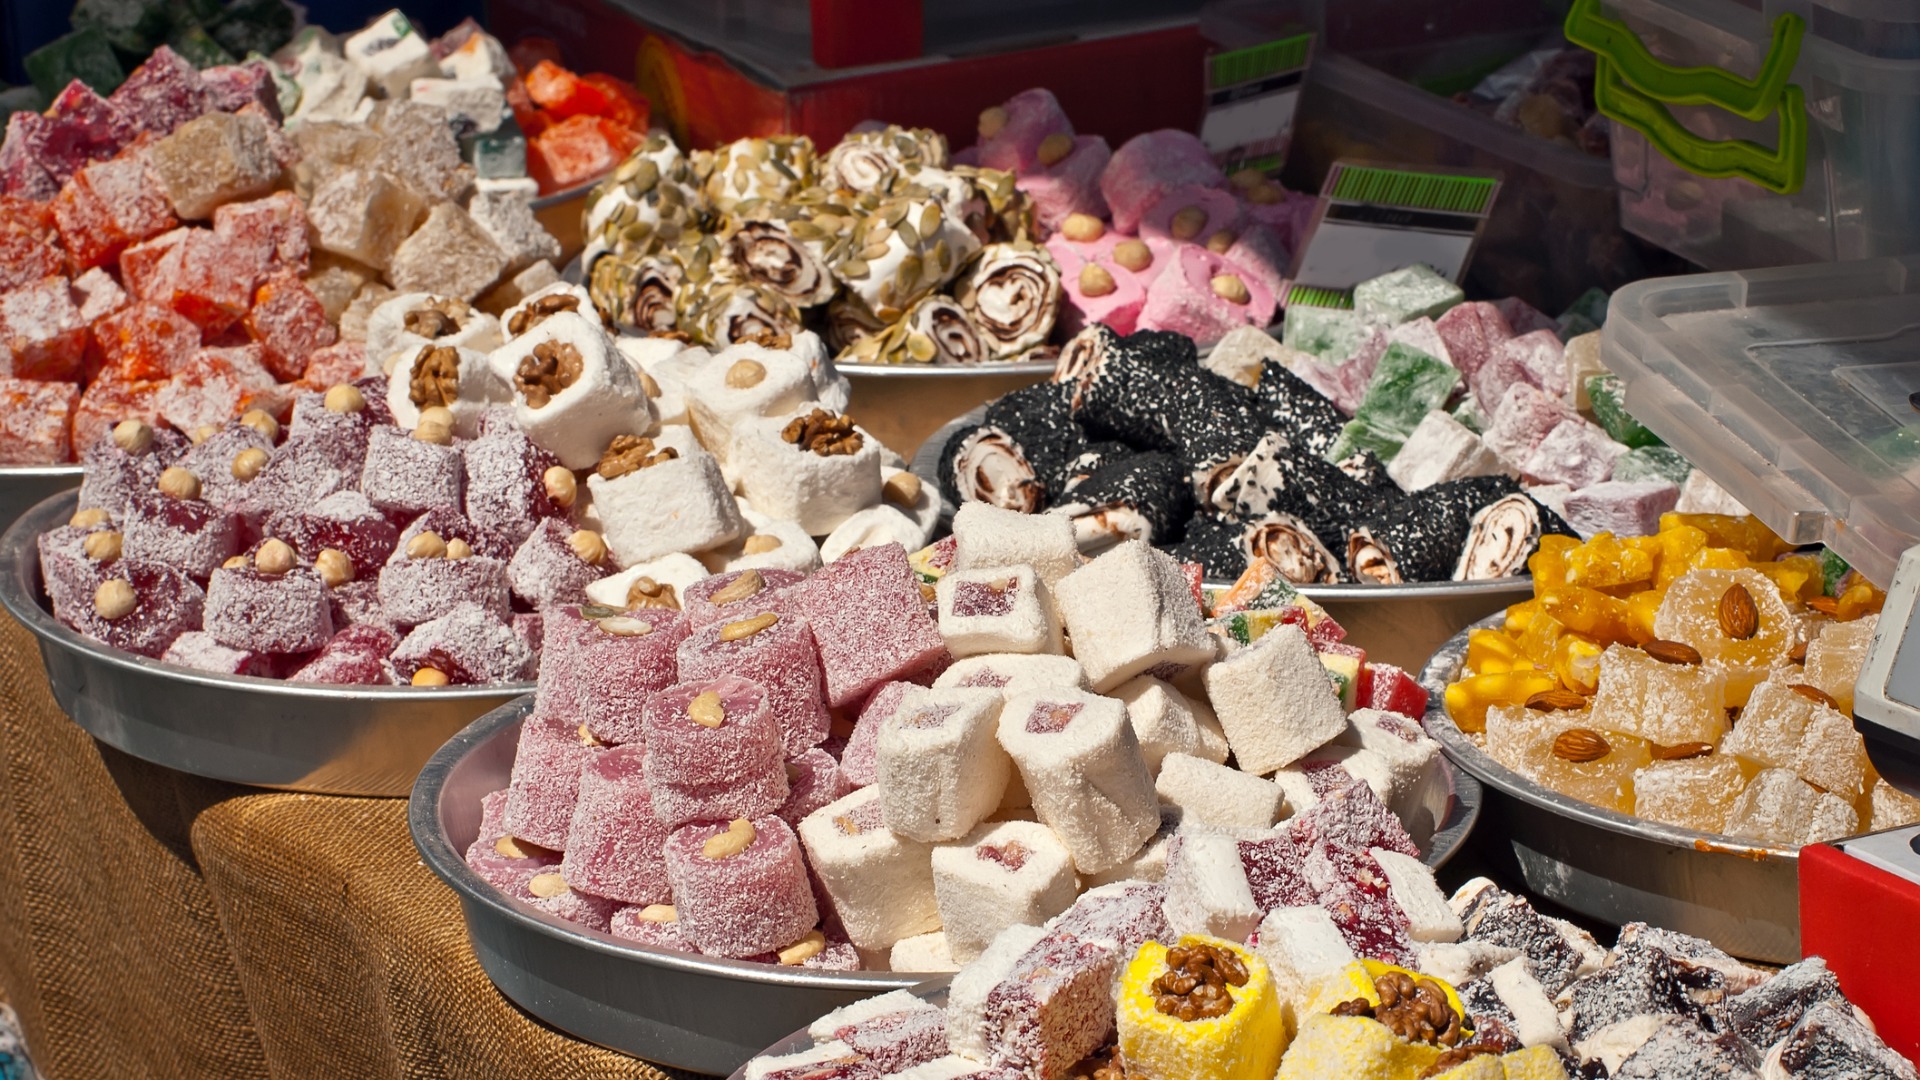 This image shows piles of various Turkish delight treats, in all colors and shapes.